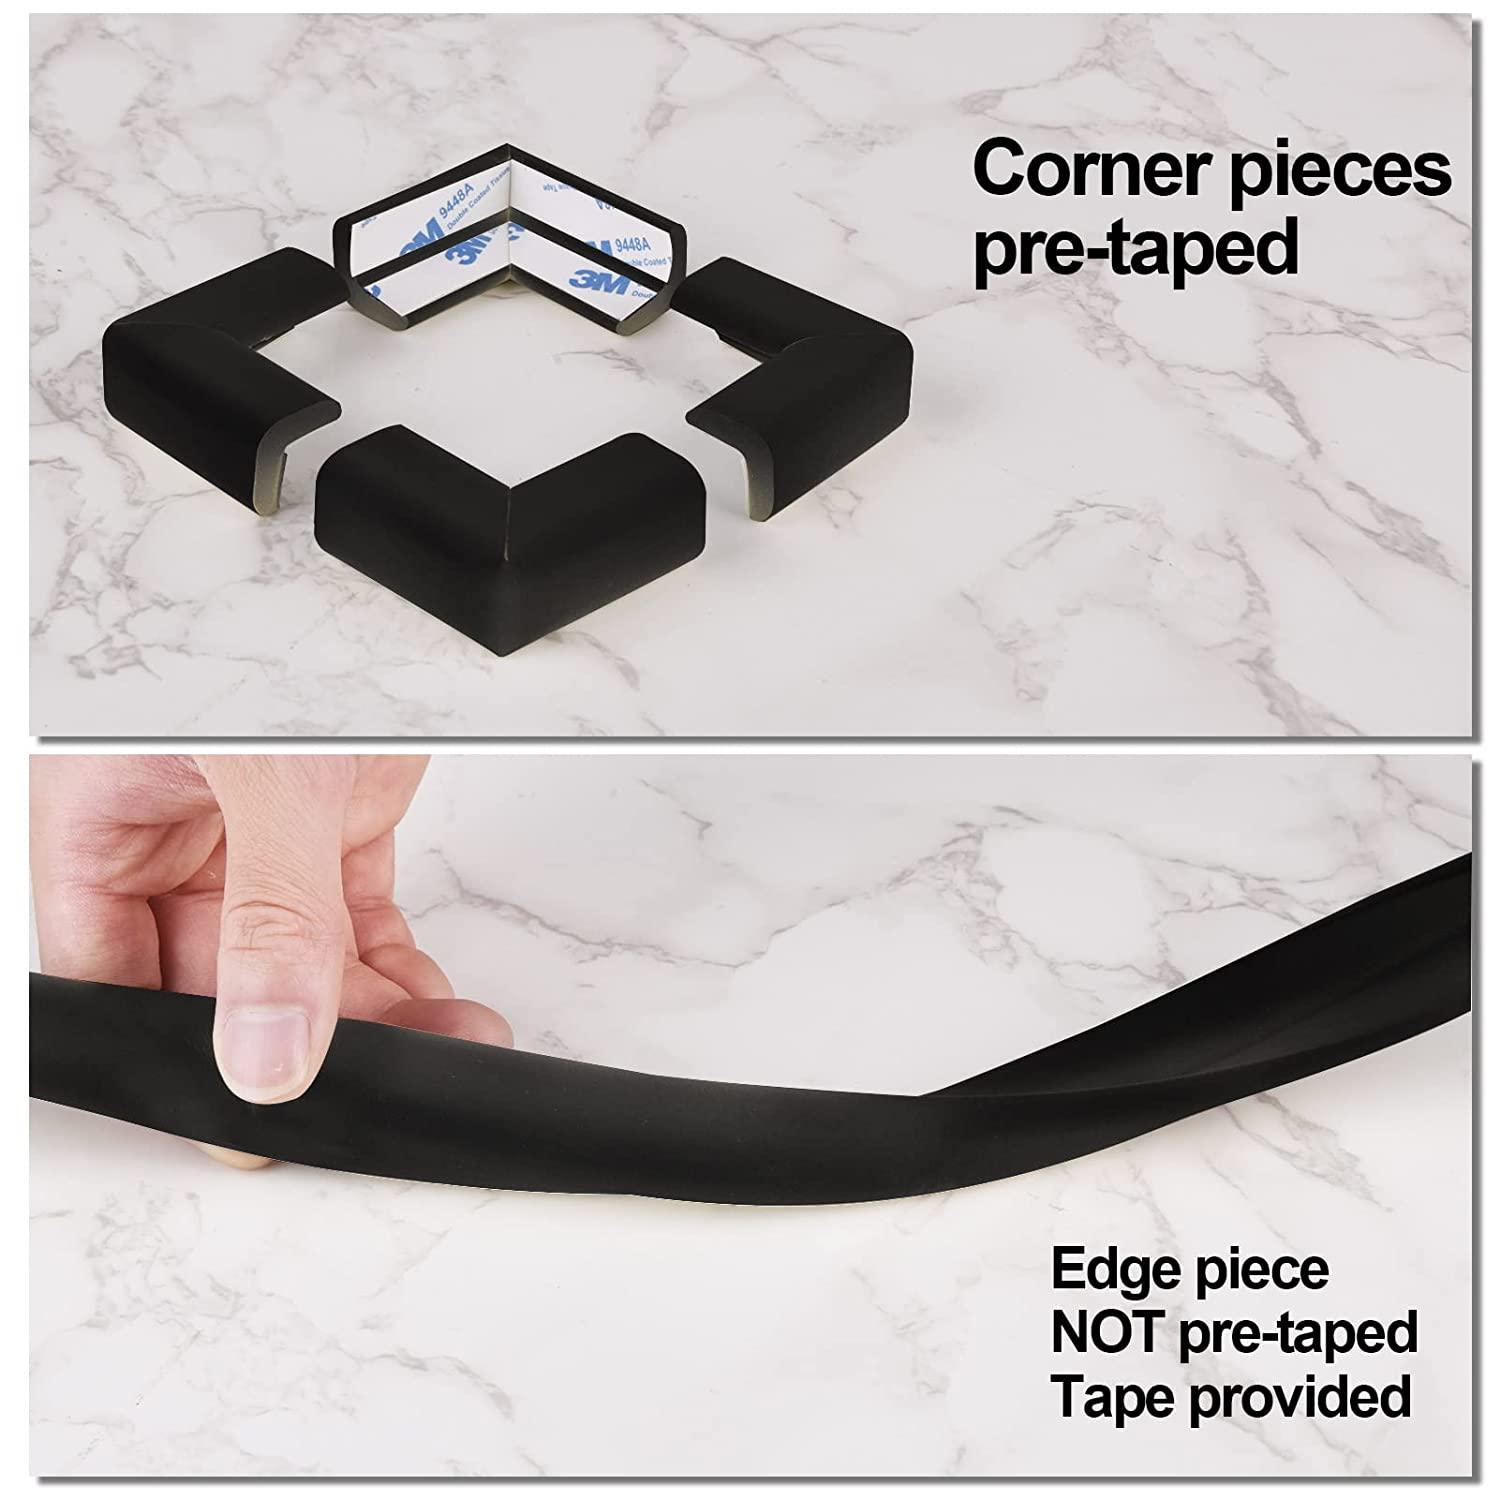 12 Pack Soft Corner Protector Baby Proofing Edge and Corner Guards, Safety  Pre-Taped Furniture Bumper for Fireplace, Table, Stair, Cabinet (Black)  Black 12 Pack